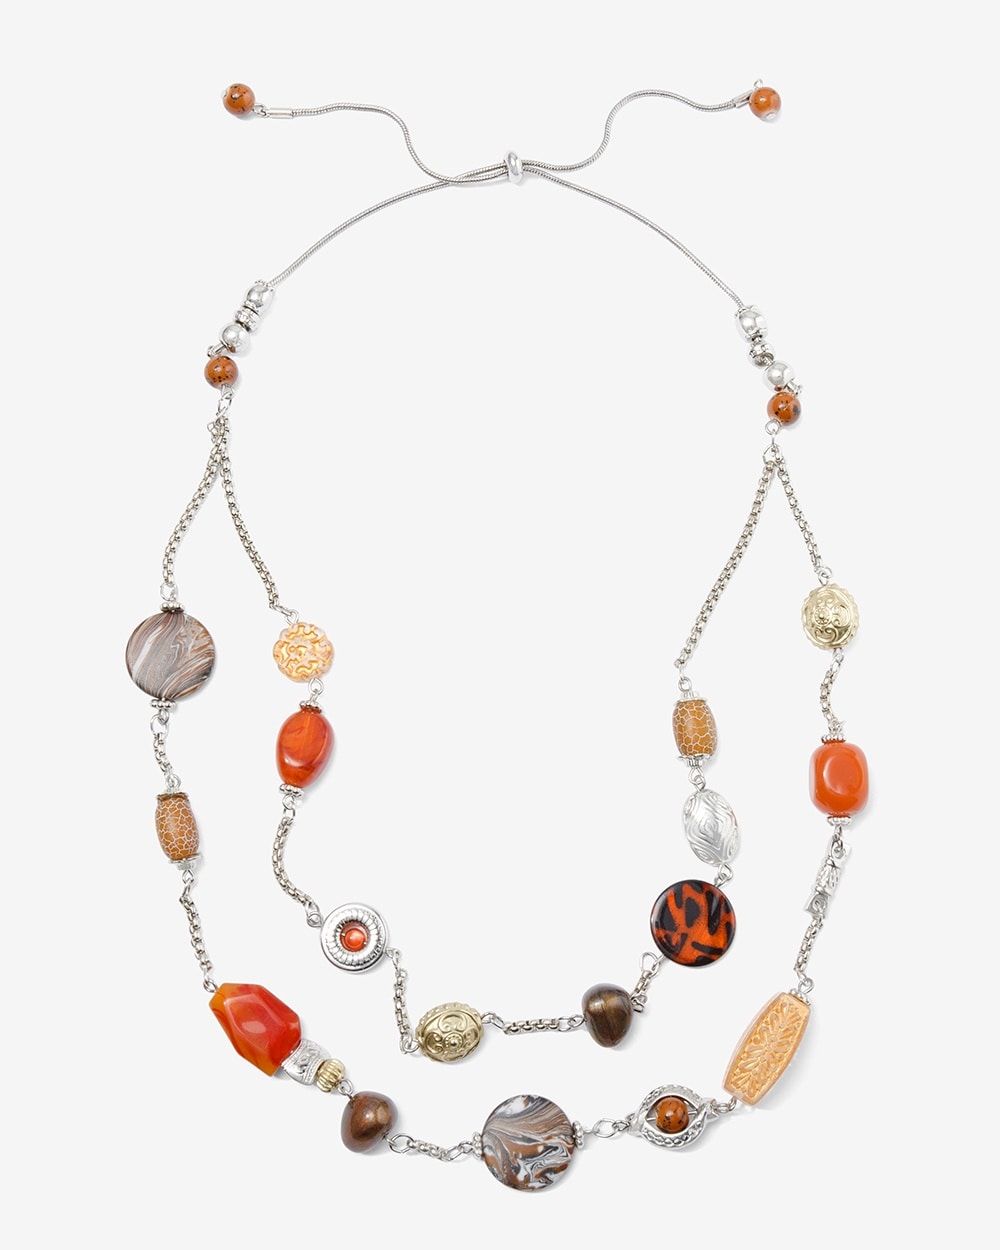 Fall Goddess Eclectic Adjustable Necklace